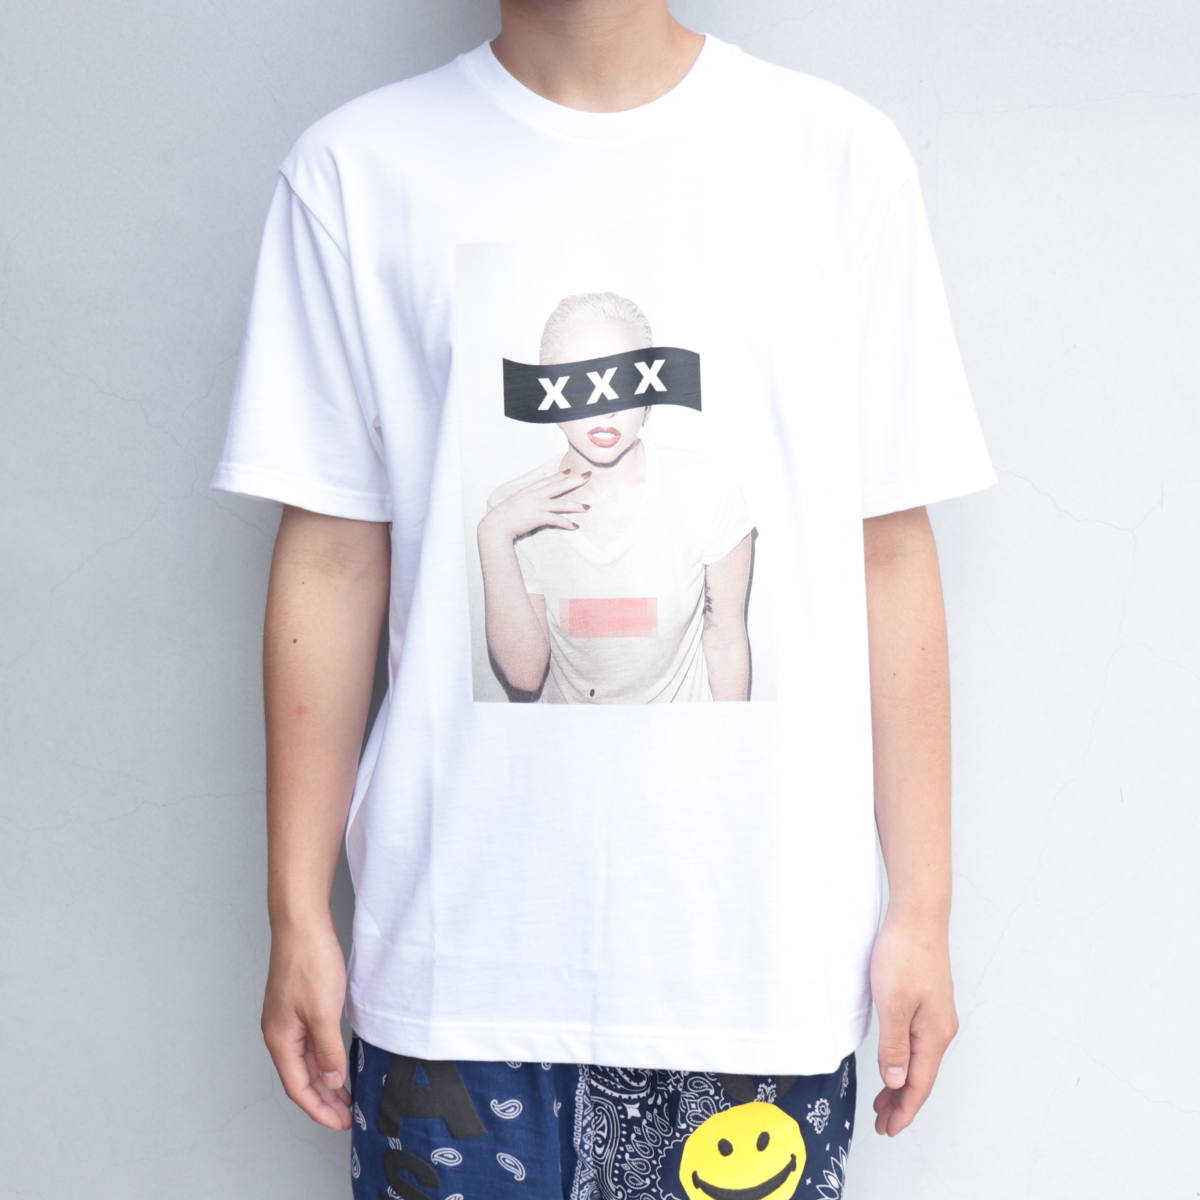 GOD SELECTION XXX 新作 Tシャツのサイズ感 | JACK in the NET WEBマガジン